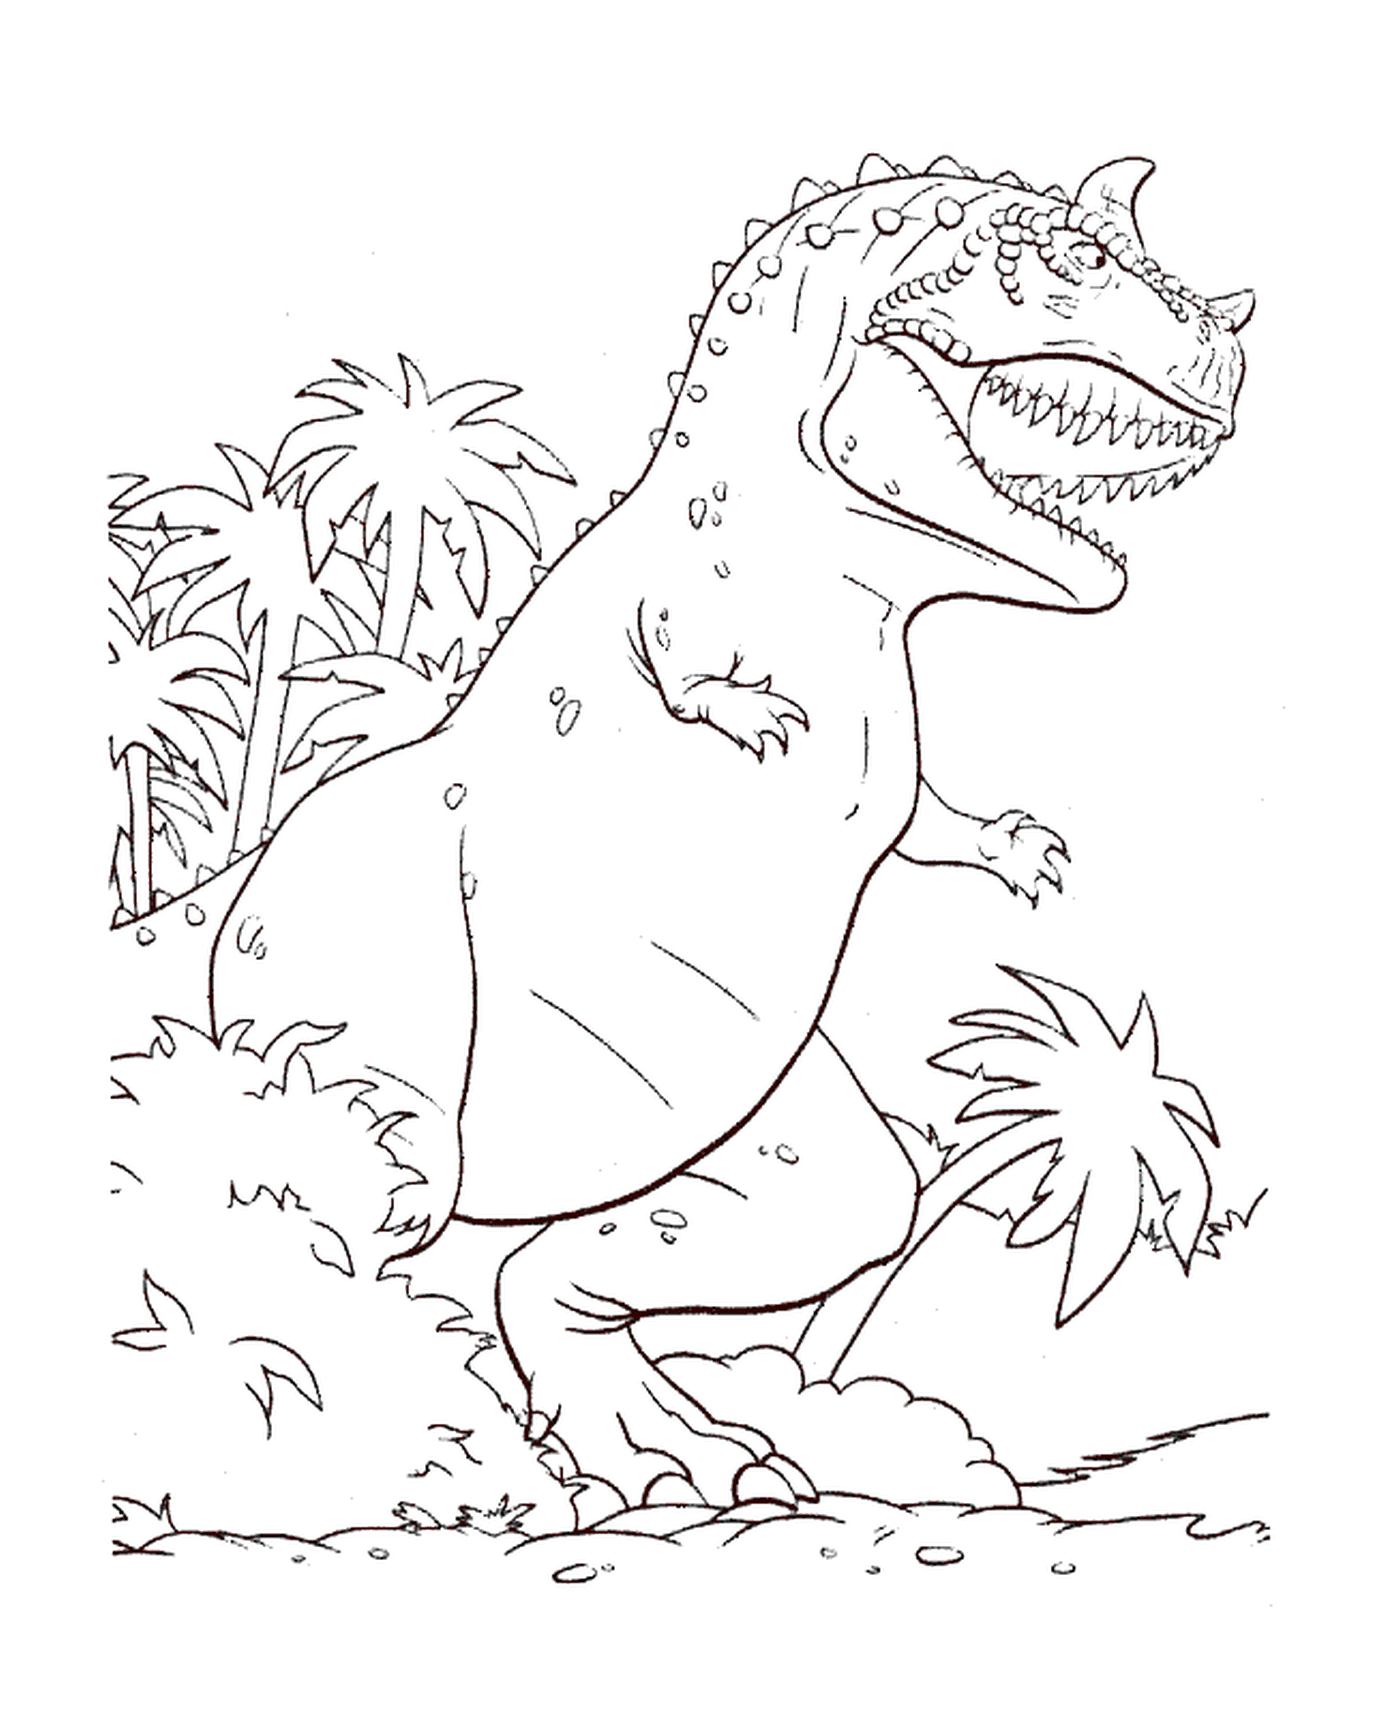  A tyrannosaur standing in the grass 